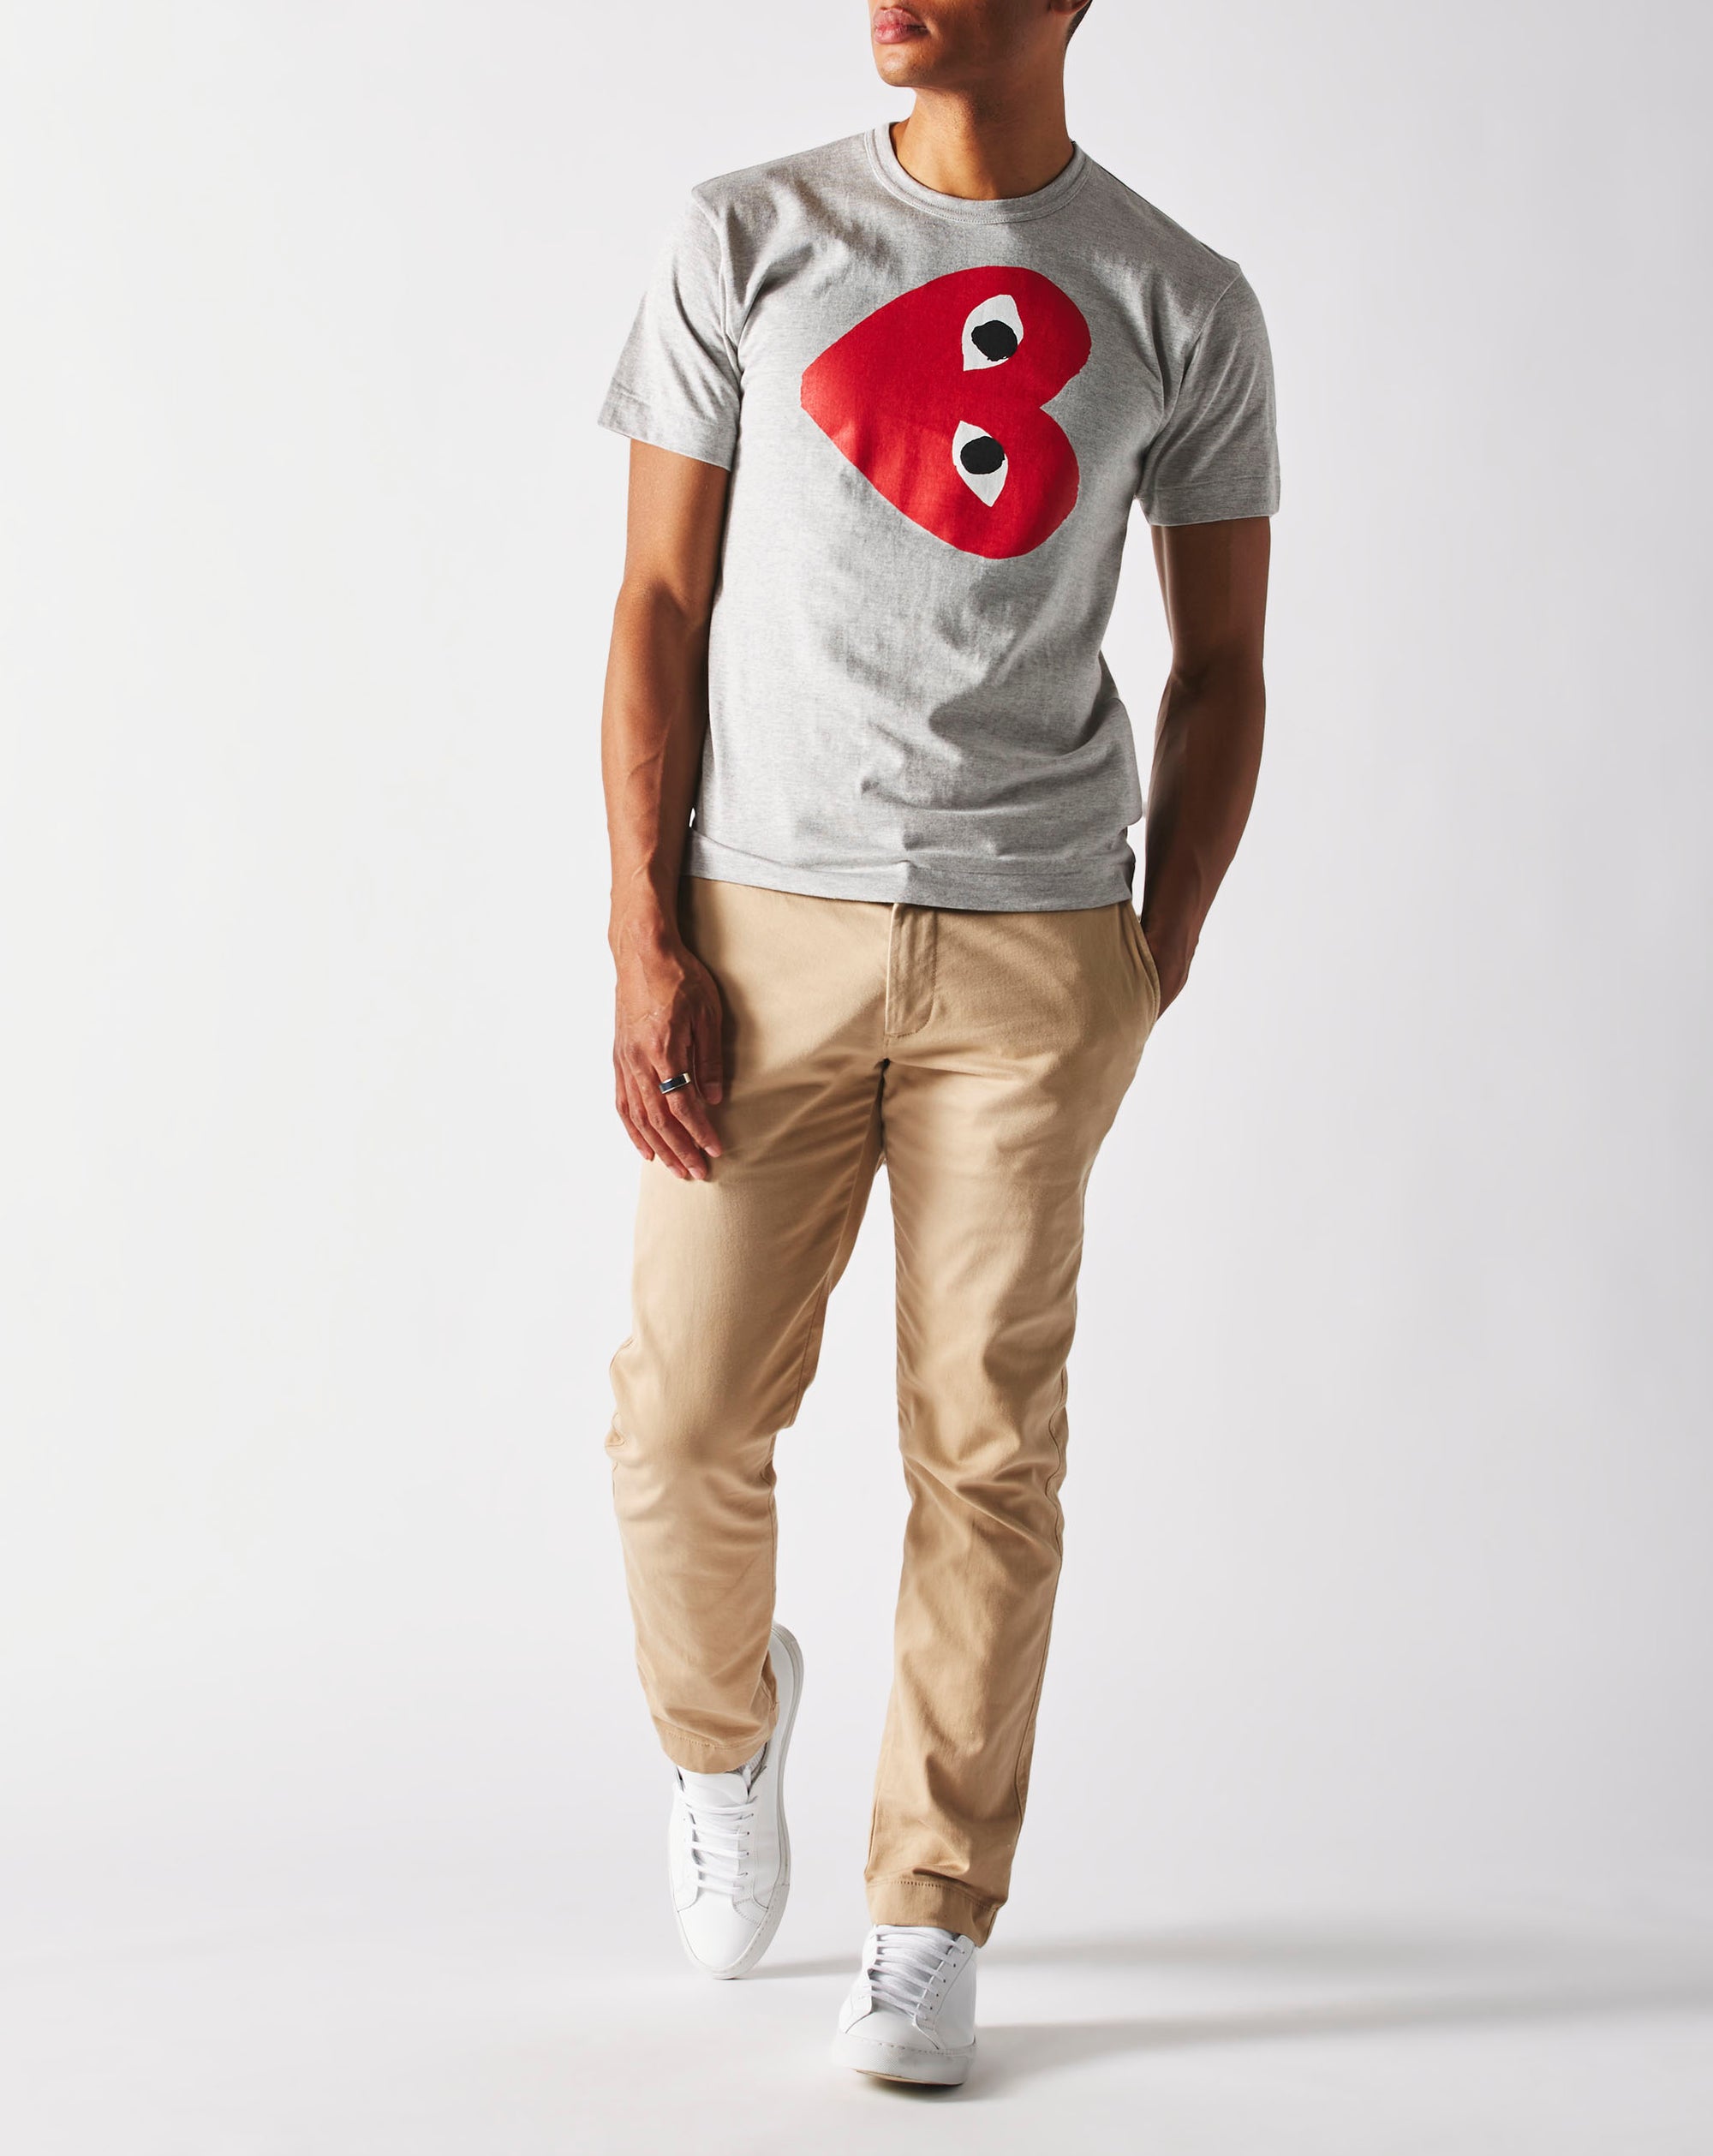 Comme des Garcons PLAY Sideways Red Heart T-Shirt - Rule of Next Apparel